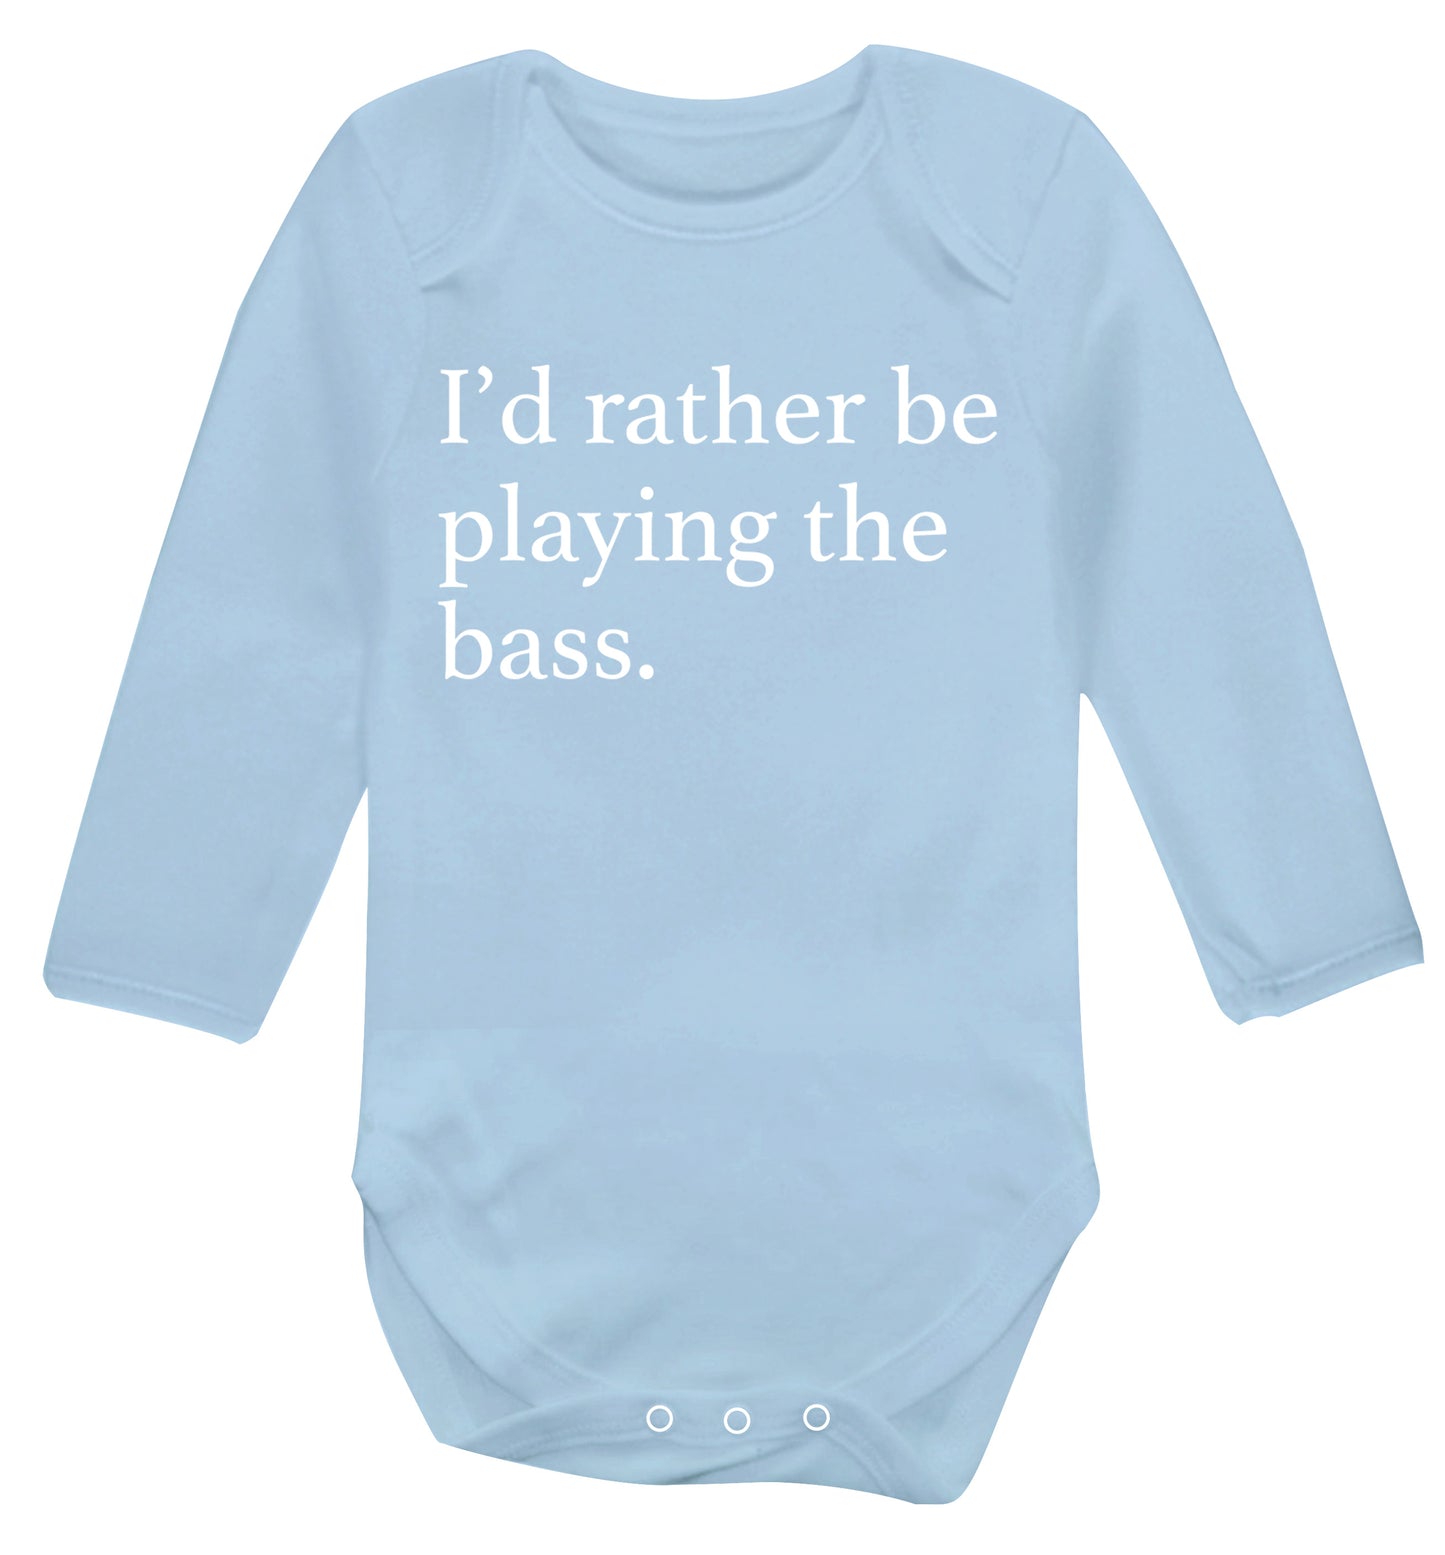 I'd rather by playing the bass Baby Vest long sleeved pale blue 6-12 months